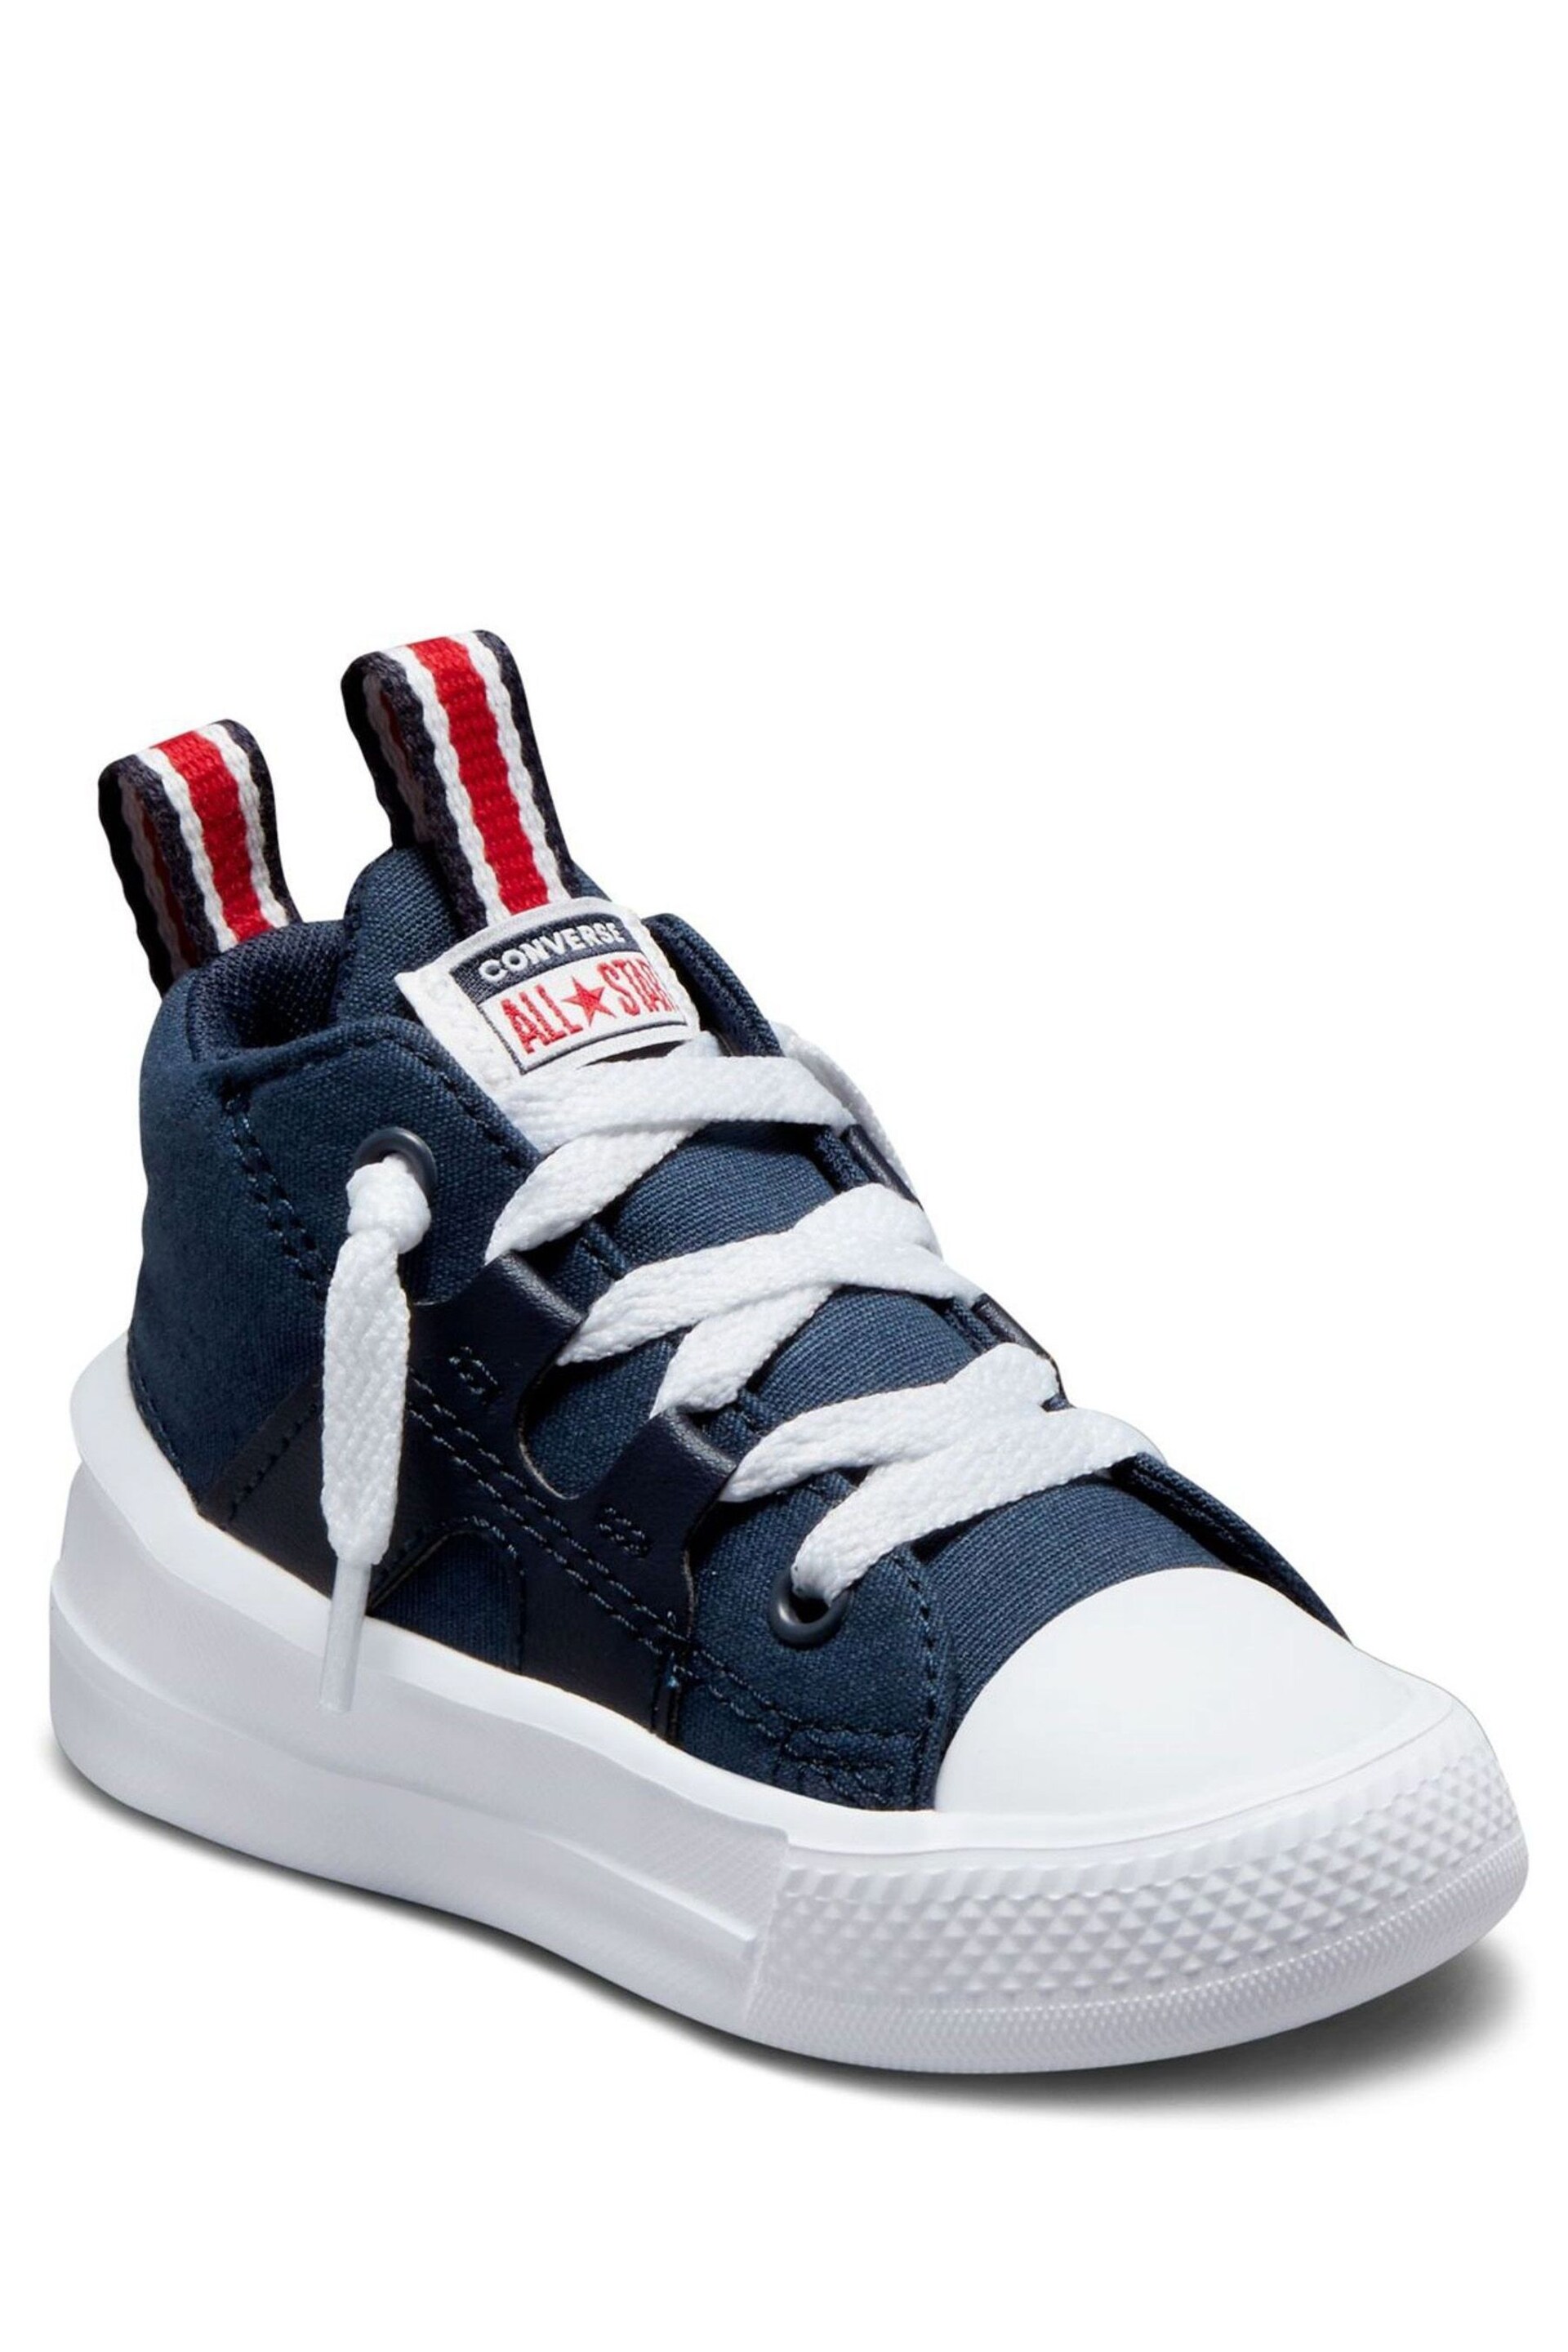 Converse Navy Ultra Infant Trainers - Image 4 of 7